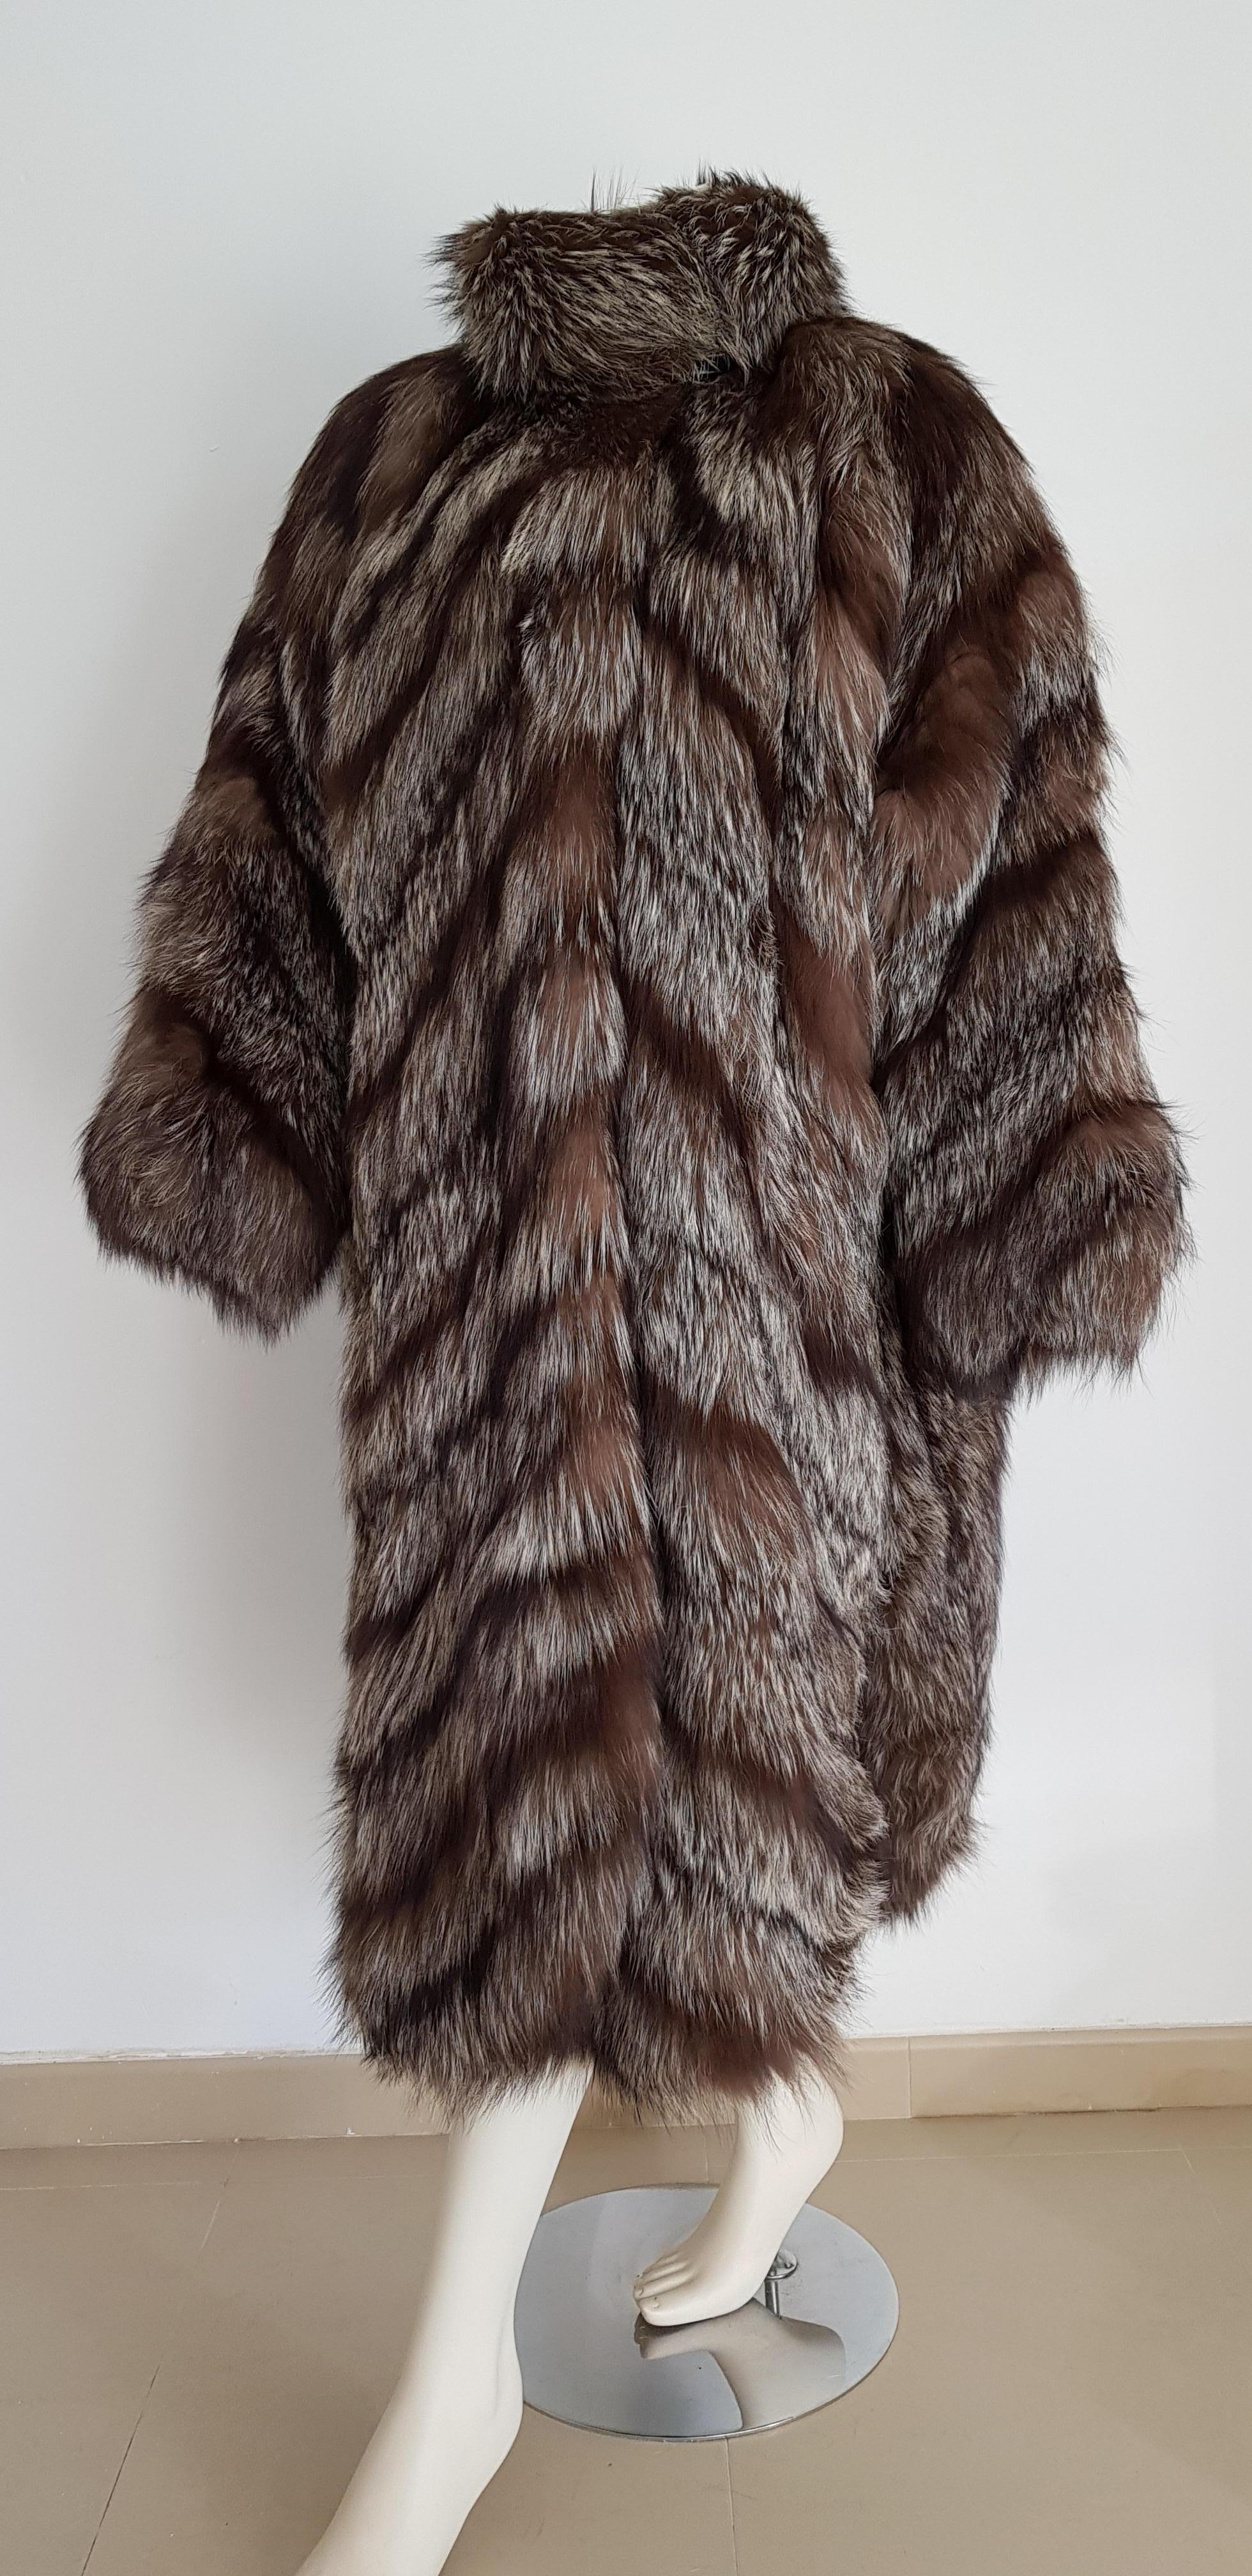 Carlo TIVIOLI Haute Couture Russian Arctic wild silver fox fur coat. Created only with whole skins. Silk lined. The species of the foxes used is rare and gives different and unique reflections even on the snow. Professionally stored - Unworn,